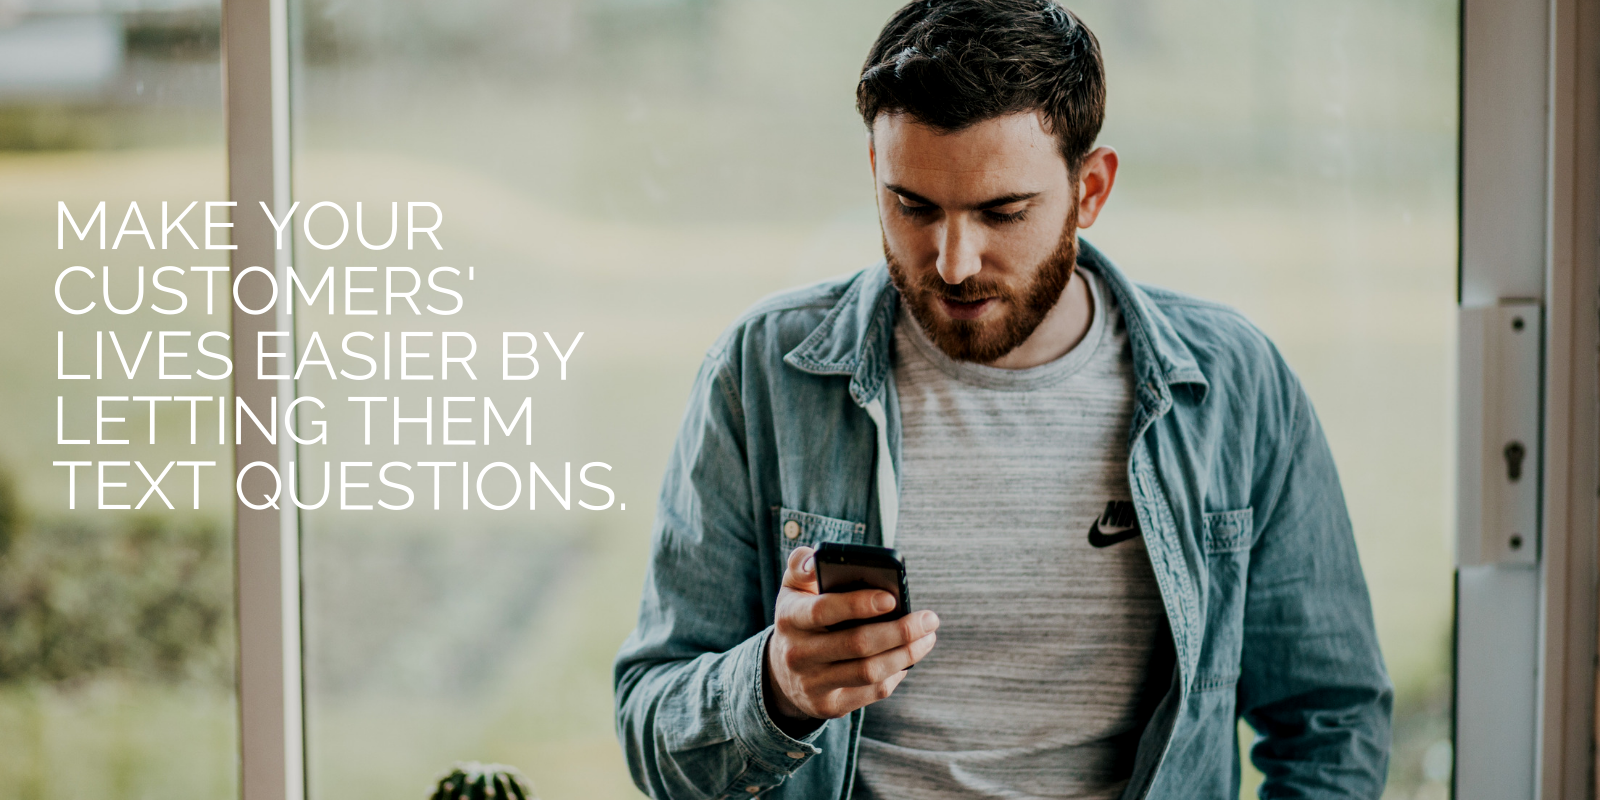 Make your customers' lives easier by letting them text questions